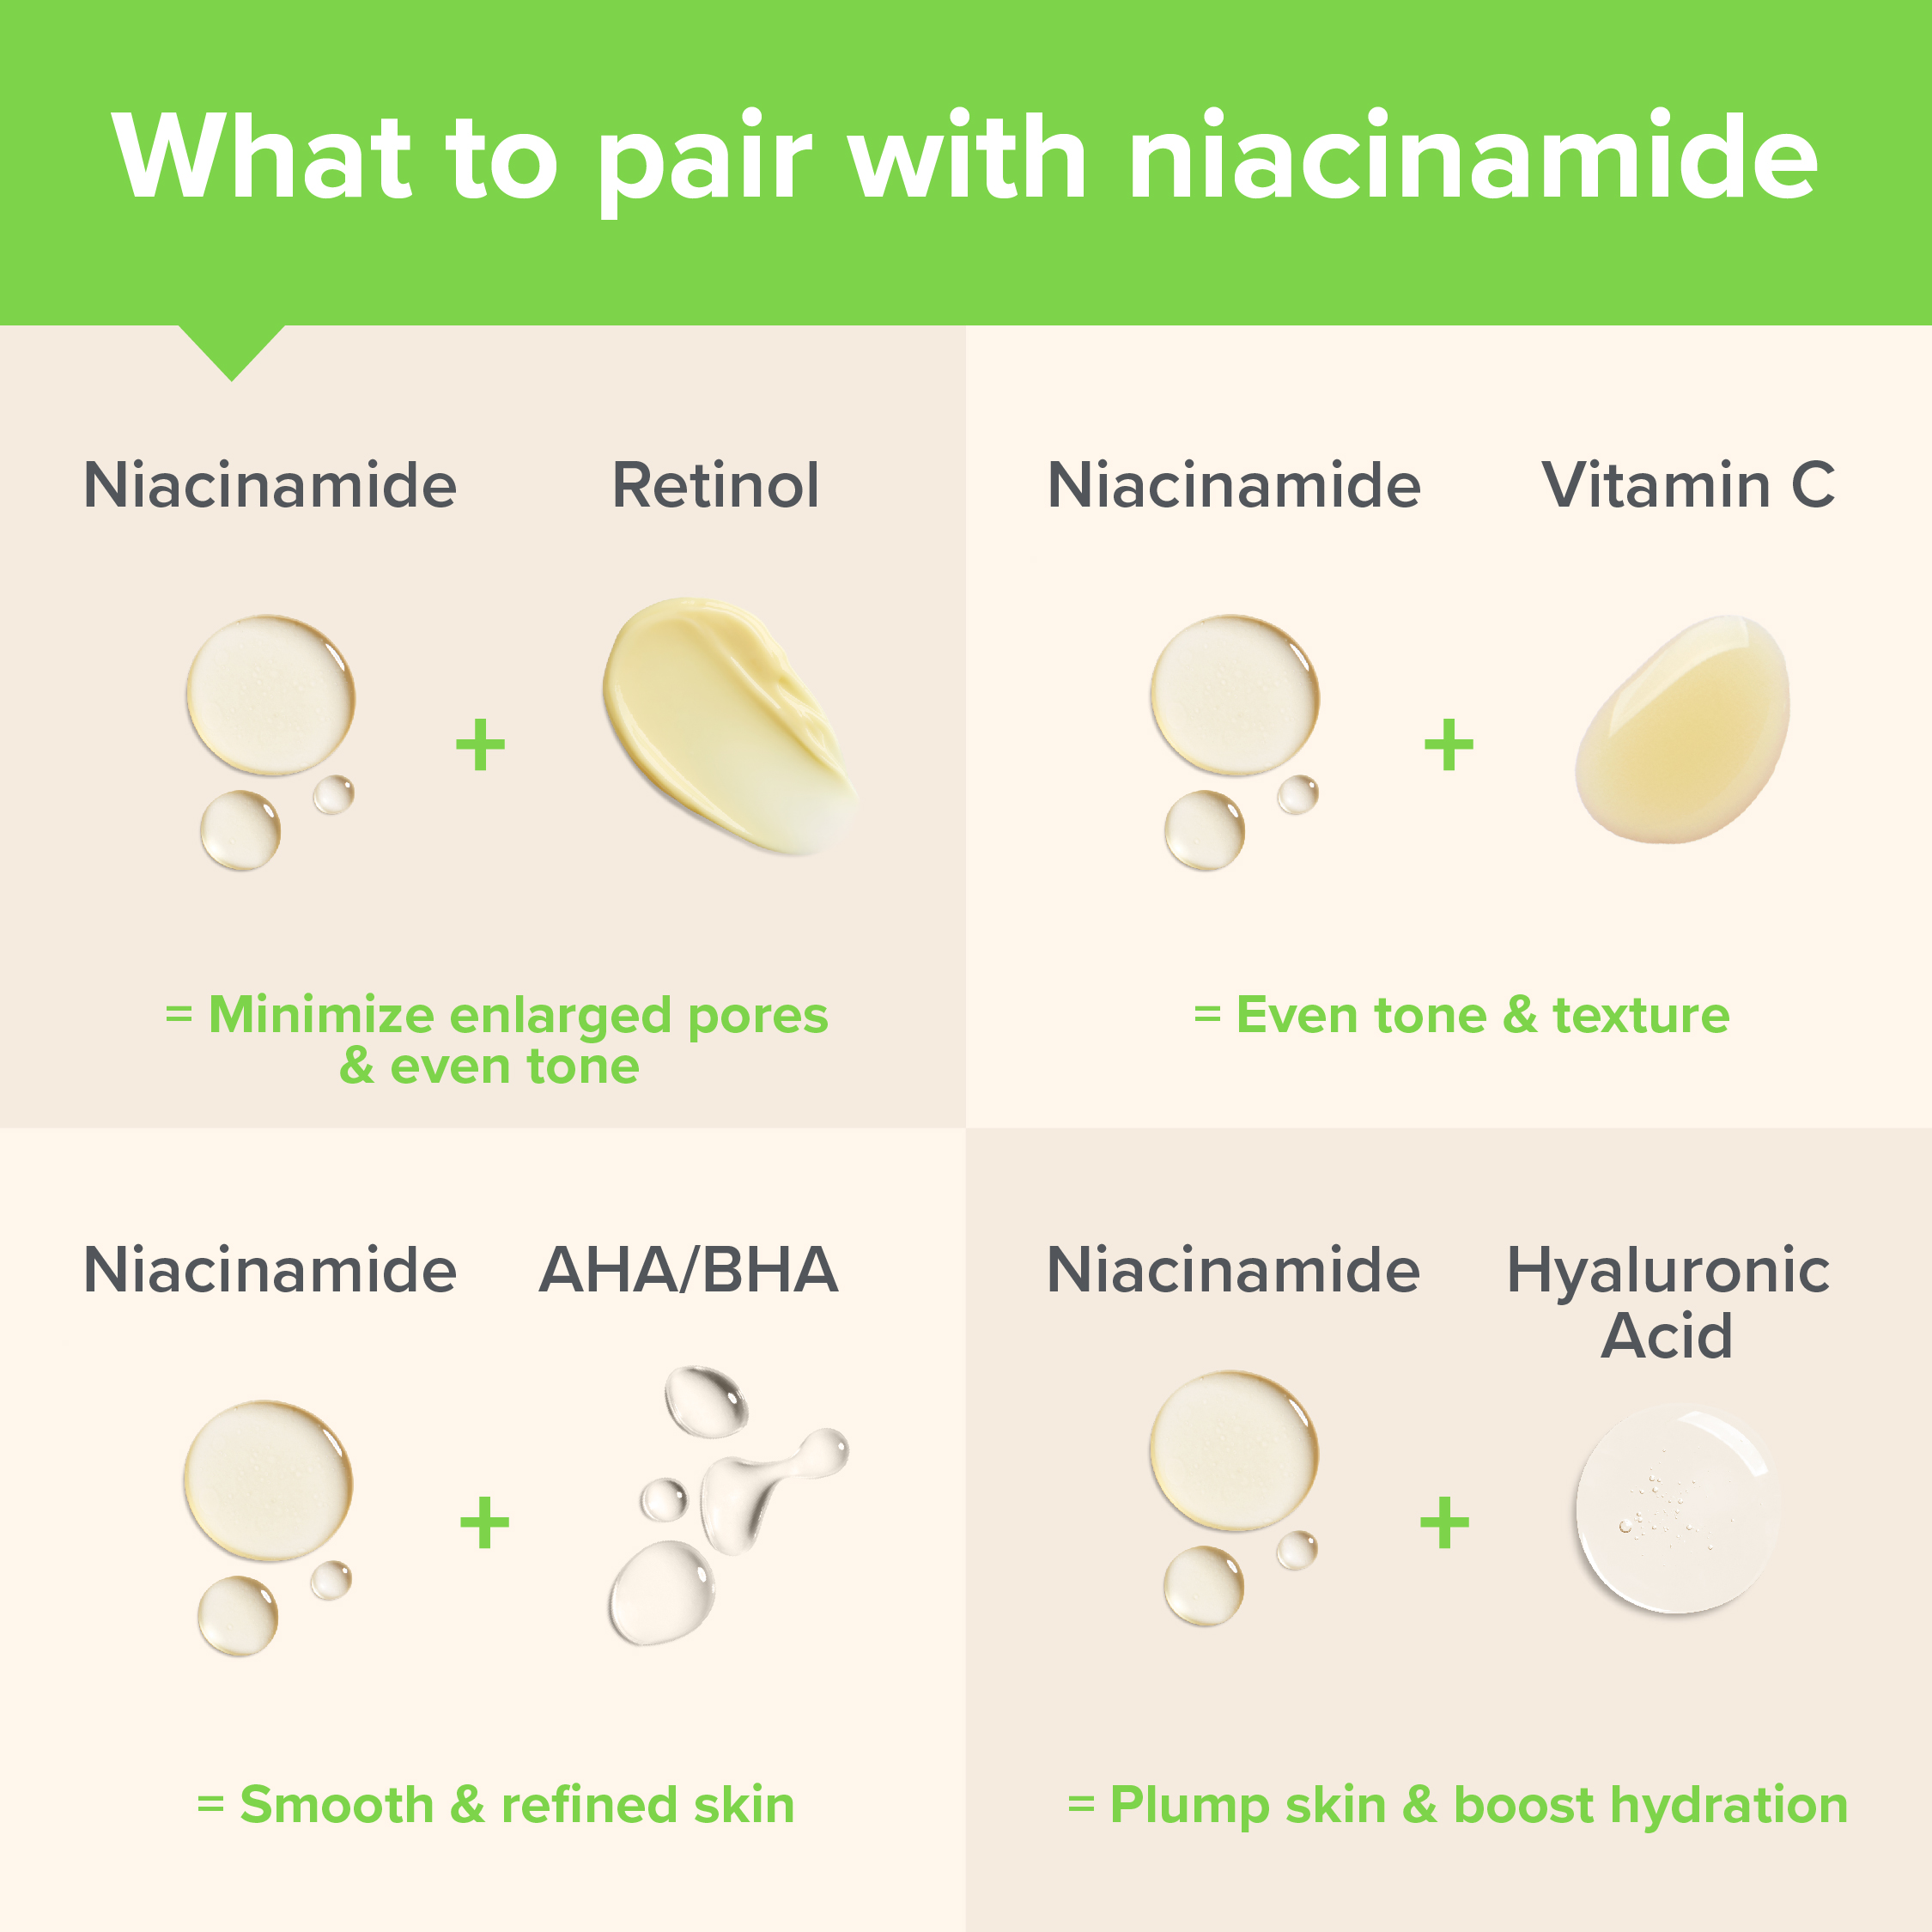 Niacinamide: 4 Benefits for Skin and Usage Tips for Topical Use